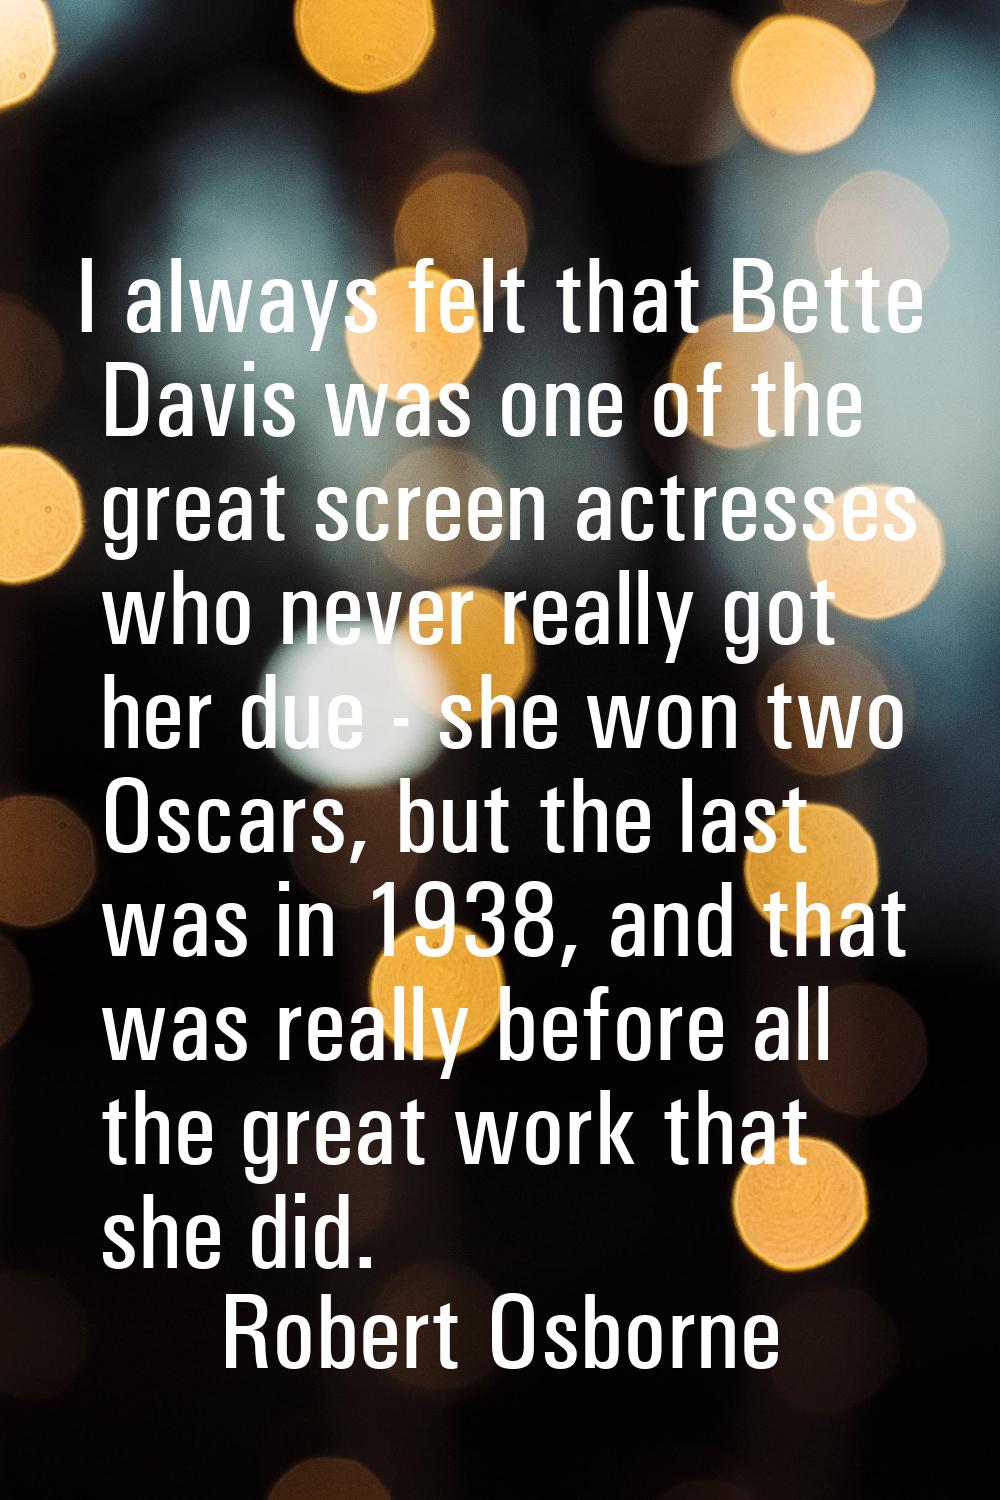 I always felt that Bette Davis was one of the great screen actresses who never really got her due -